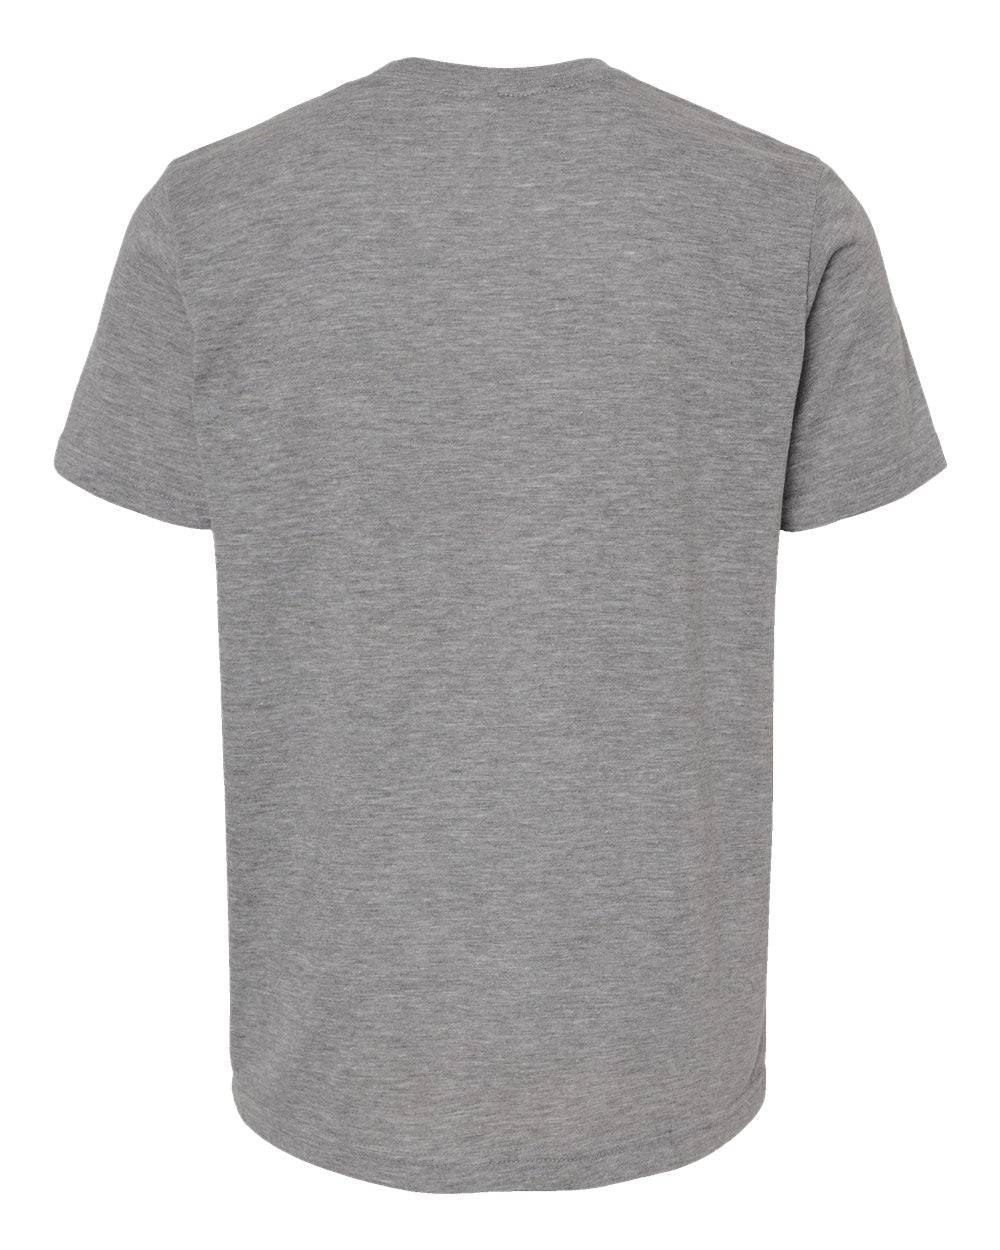 M&O Youth Deluxe Blend T-Shirt 3544 #color_Heather Grey